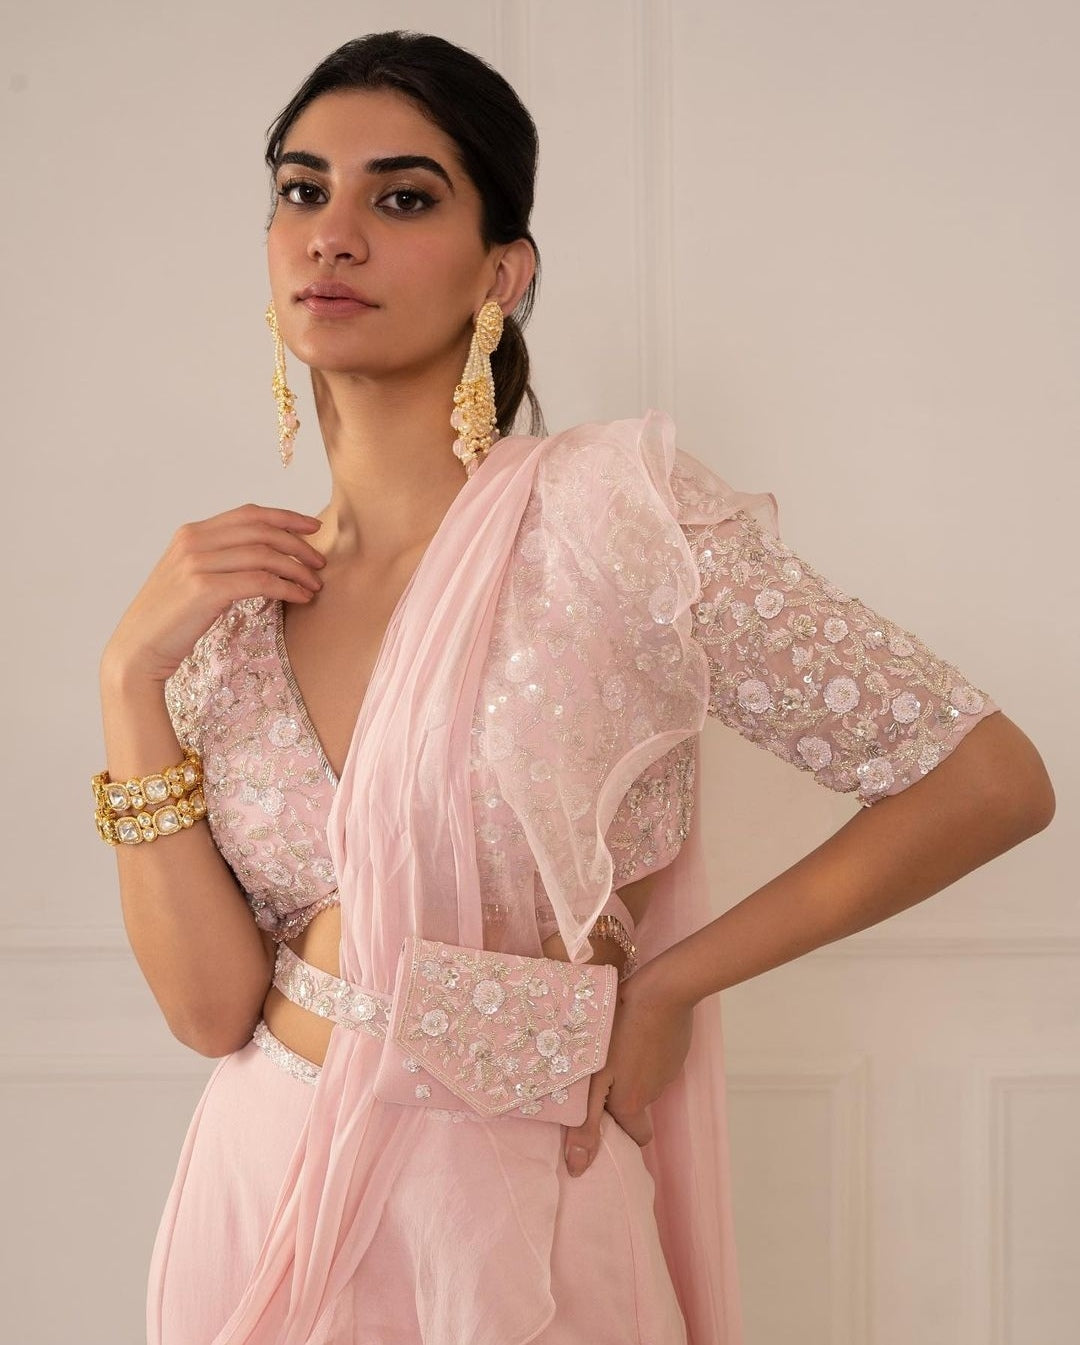 Indian Clothing in Denver, CO and Aurora, CO. Pink Saree with Belt - India Fashion X 